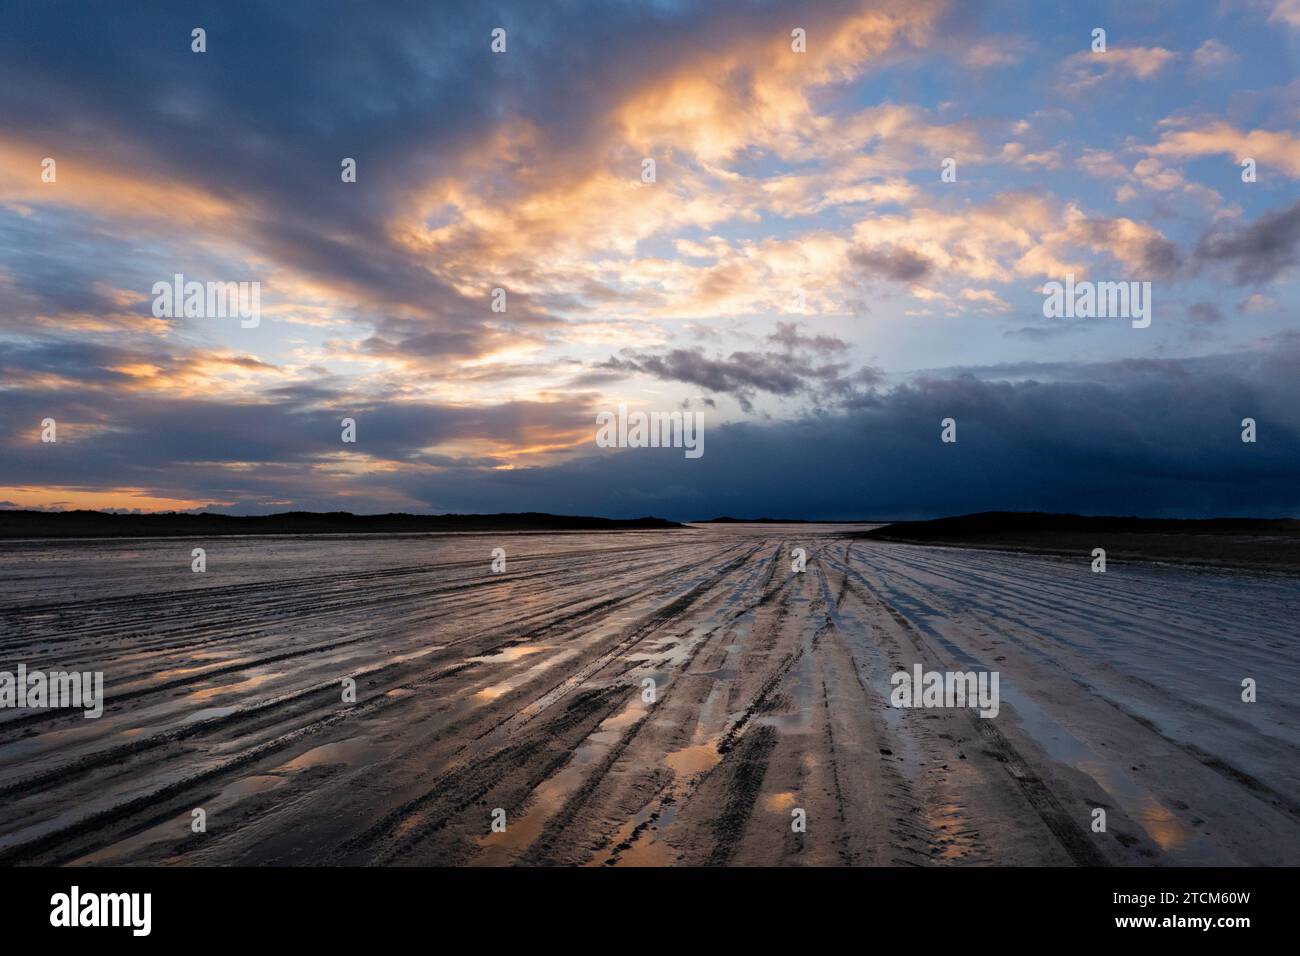 Traces of car tires on a muddy beach, leading to the horizon at nightfall, under a beautifully colored sky, threatening clouds in the distance Stock Photo